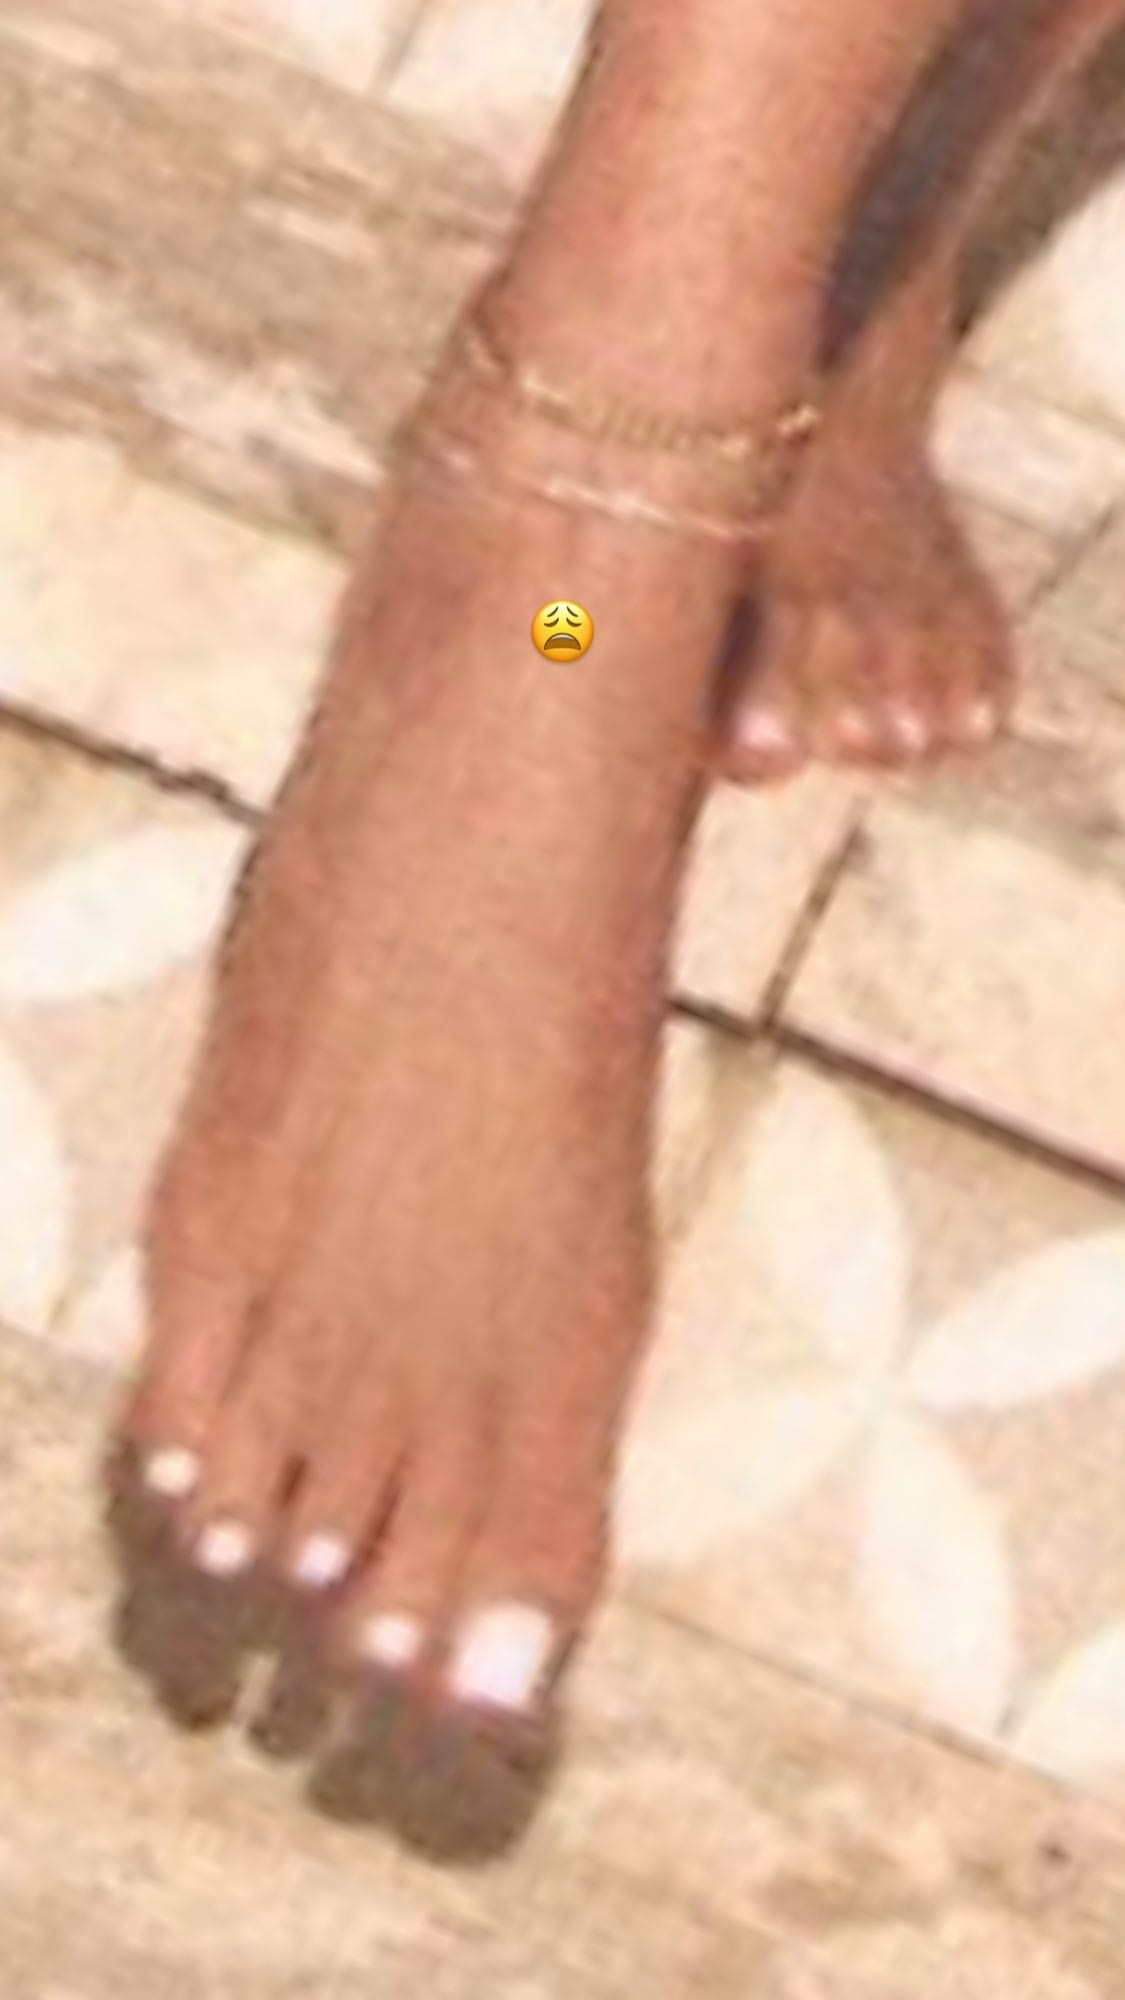 Kylie Jenner Responds To People Trolling Her Toes By Posting A Whole